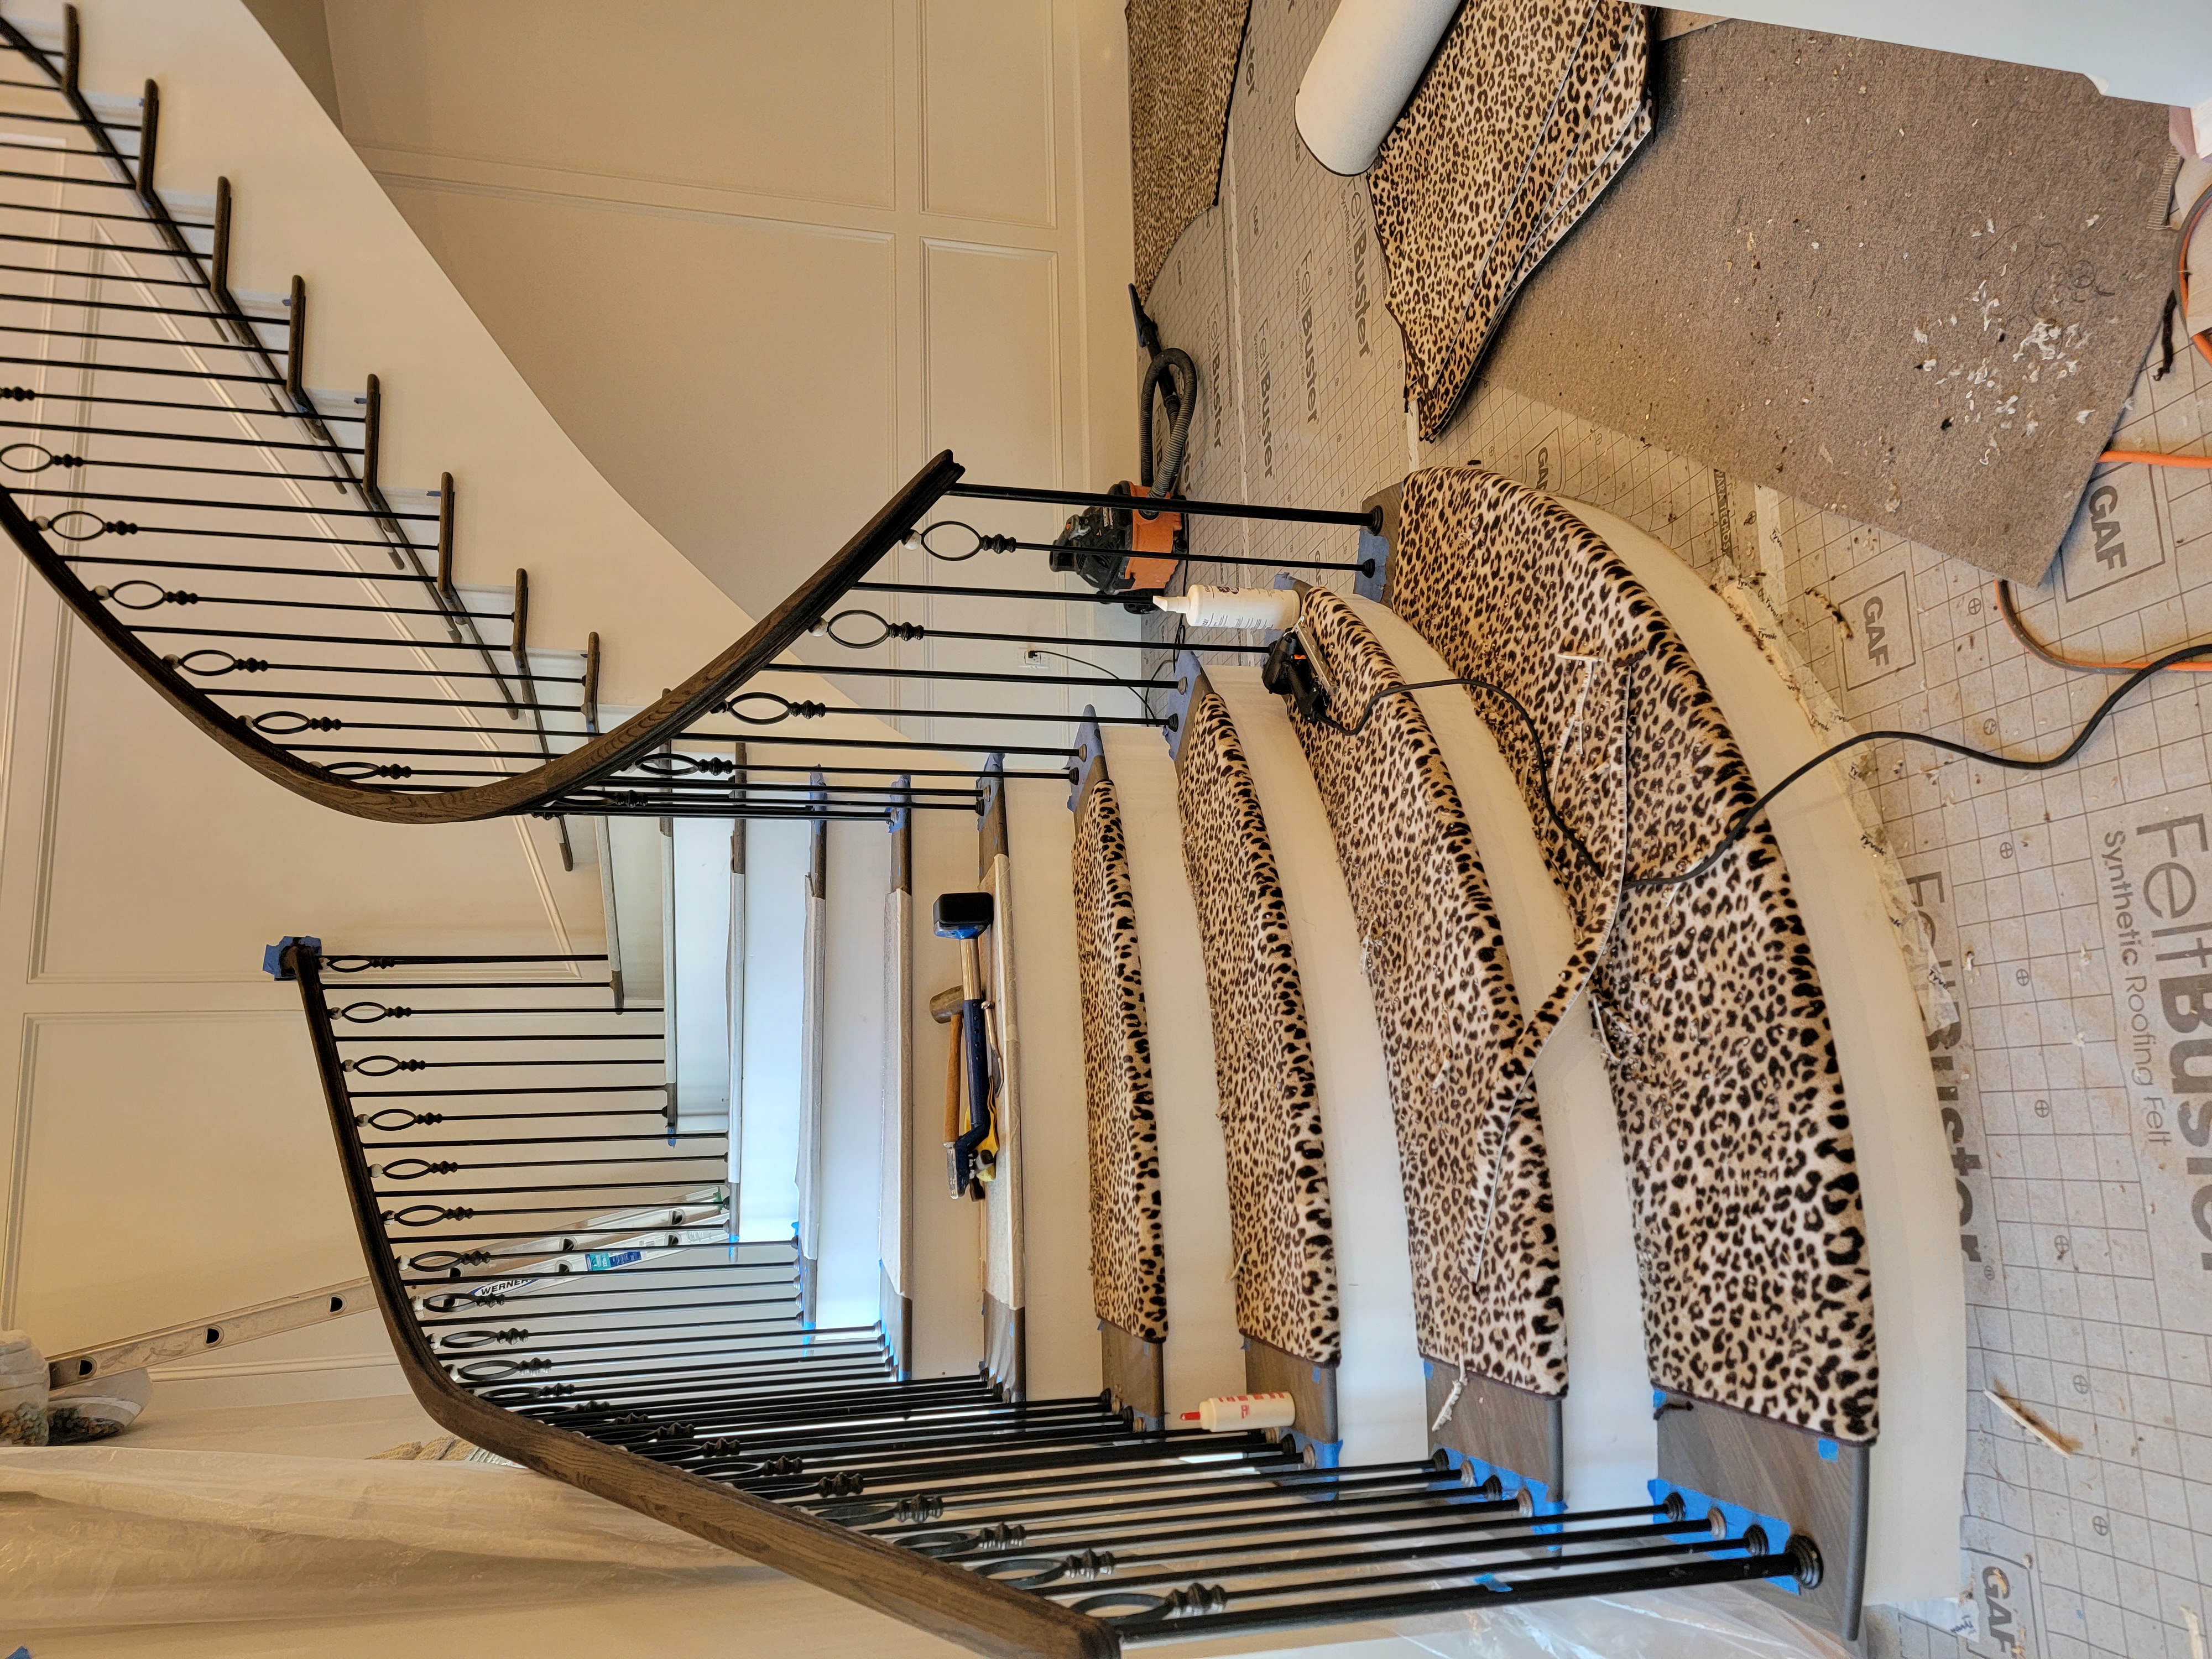 Leopard patterned stair runner at the beginning of the installation.